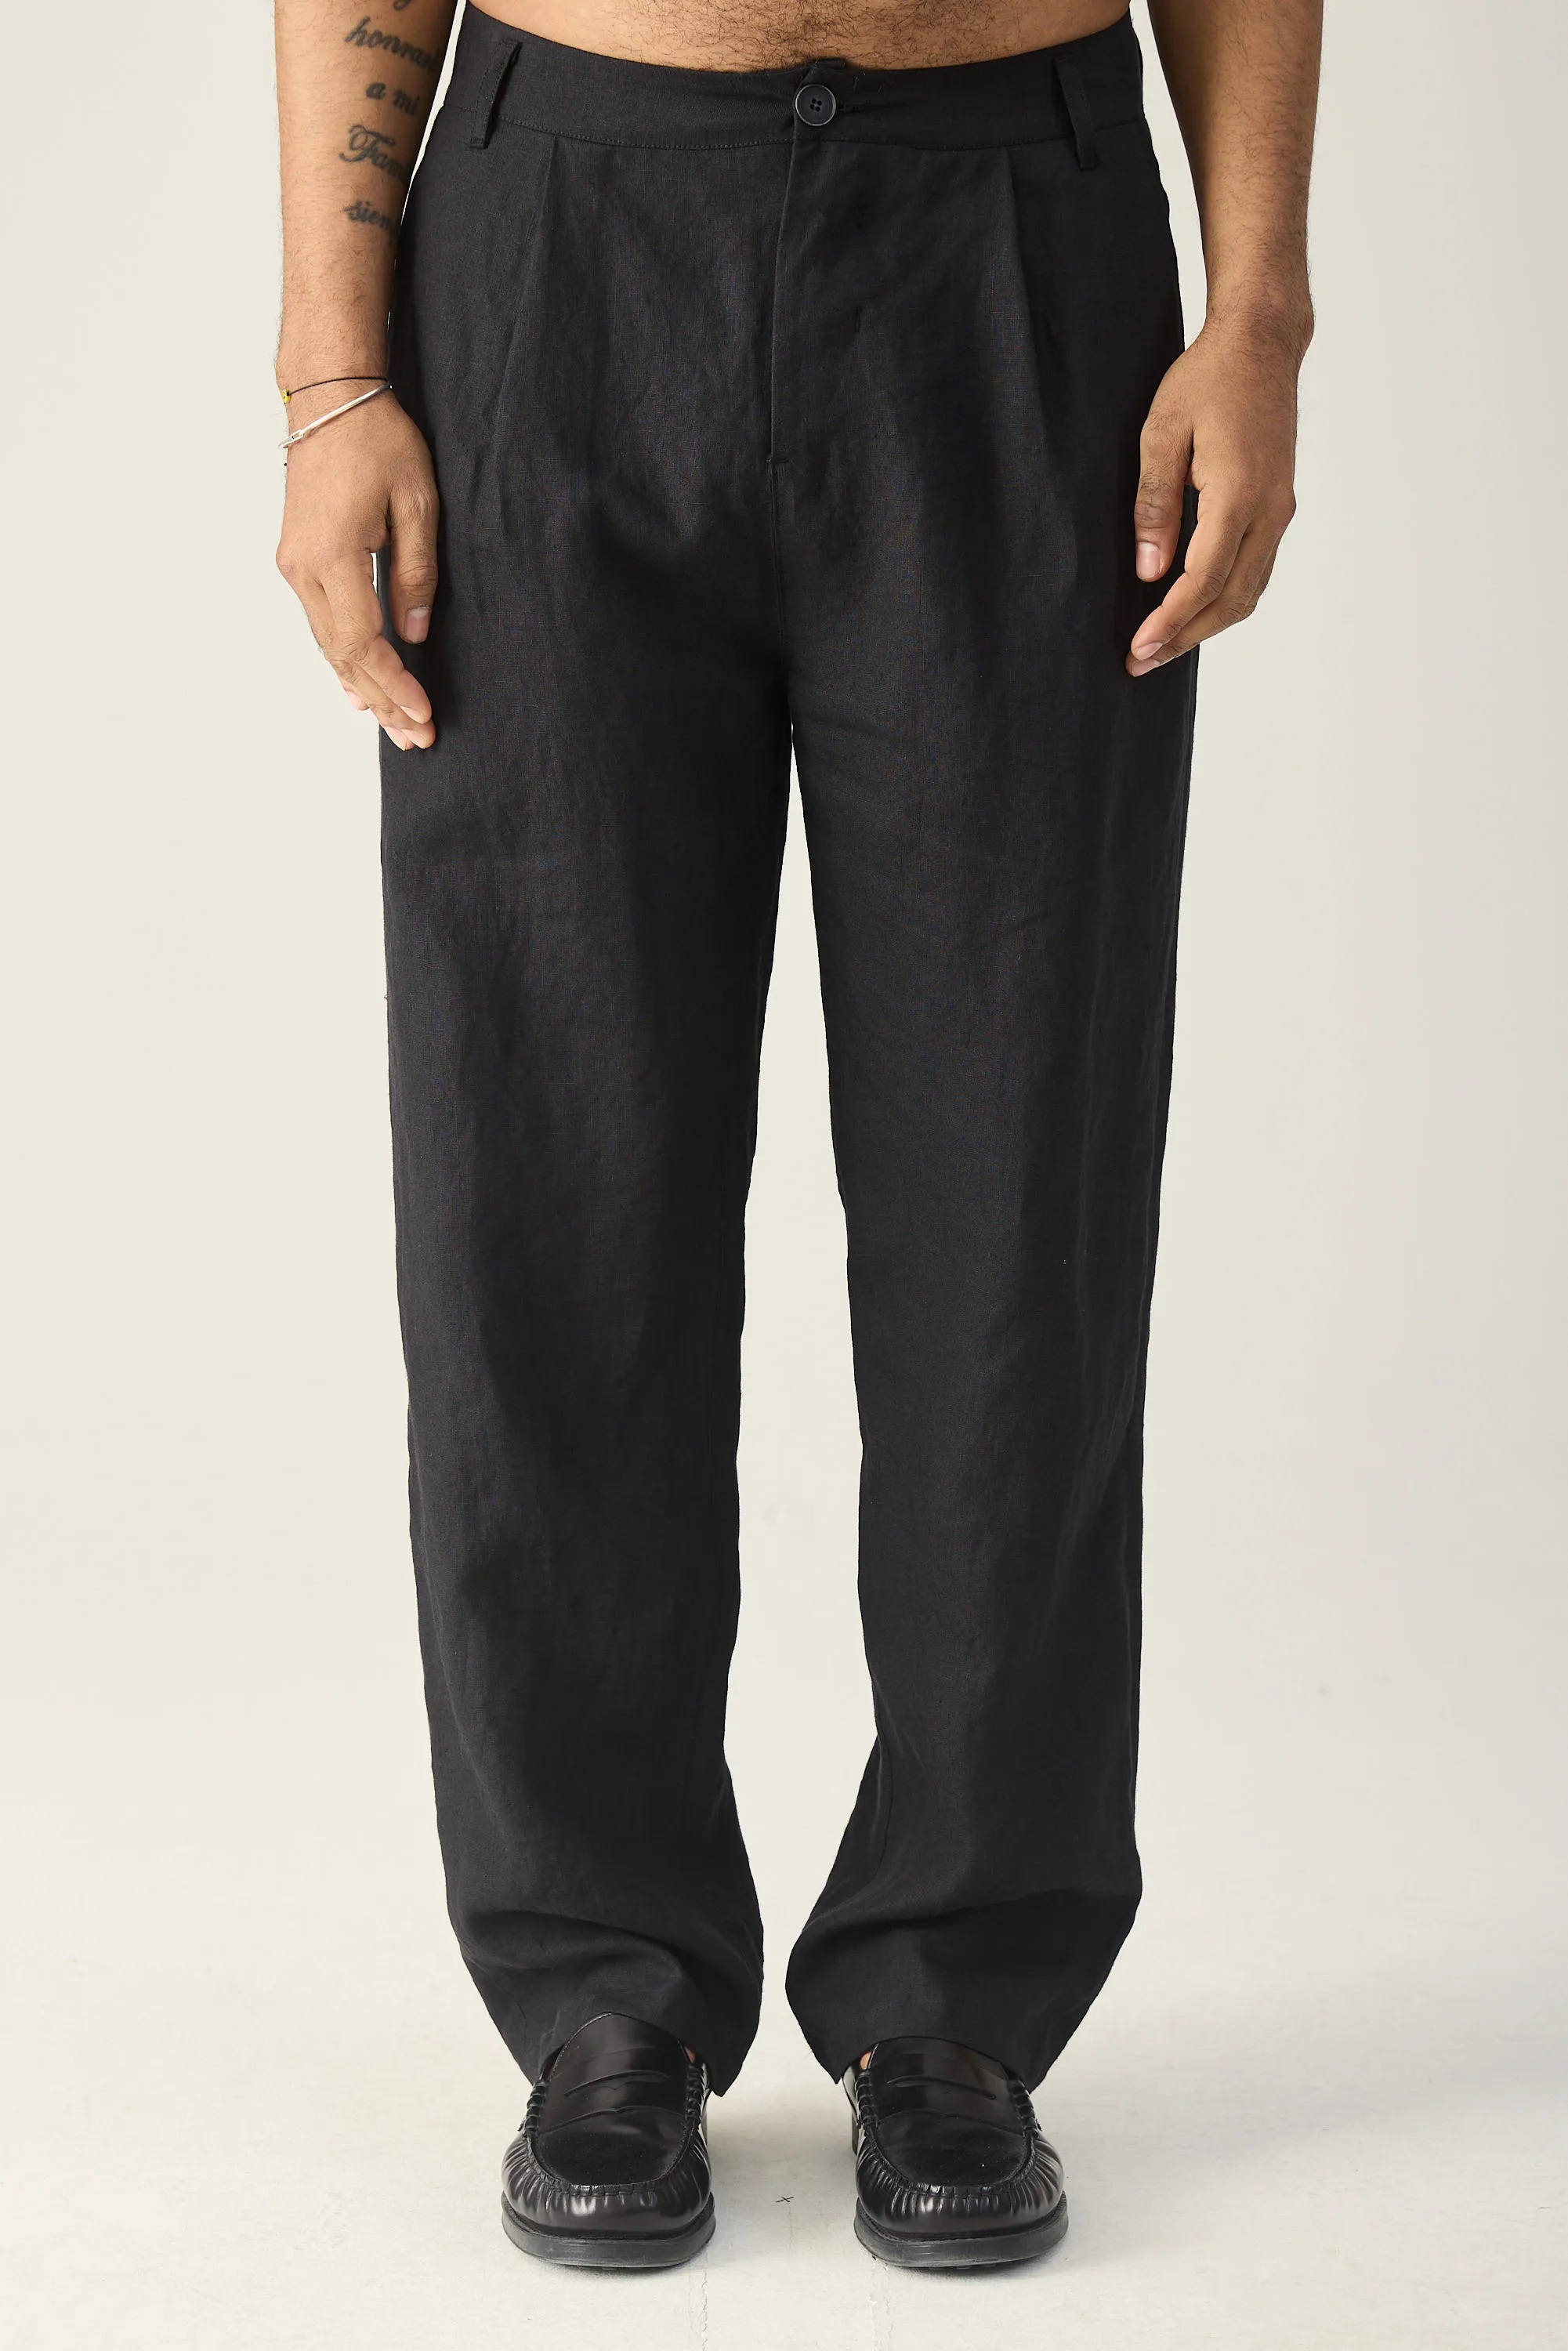 HANNIBAL. Trouser Heli in Washed Black 50